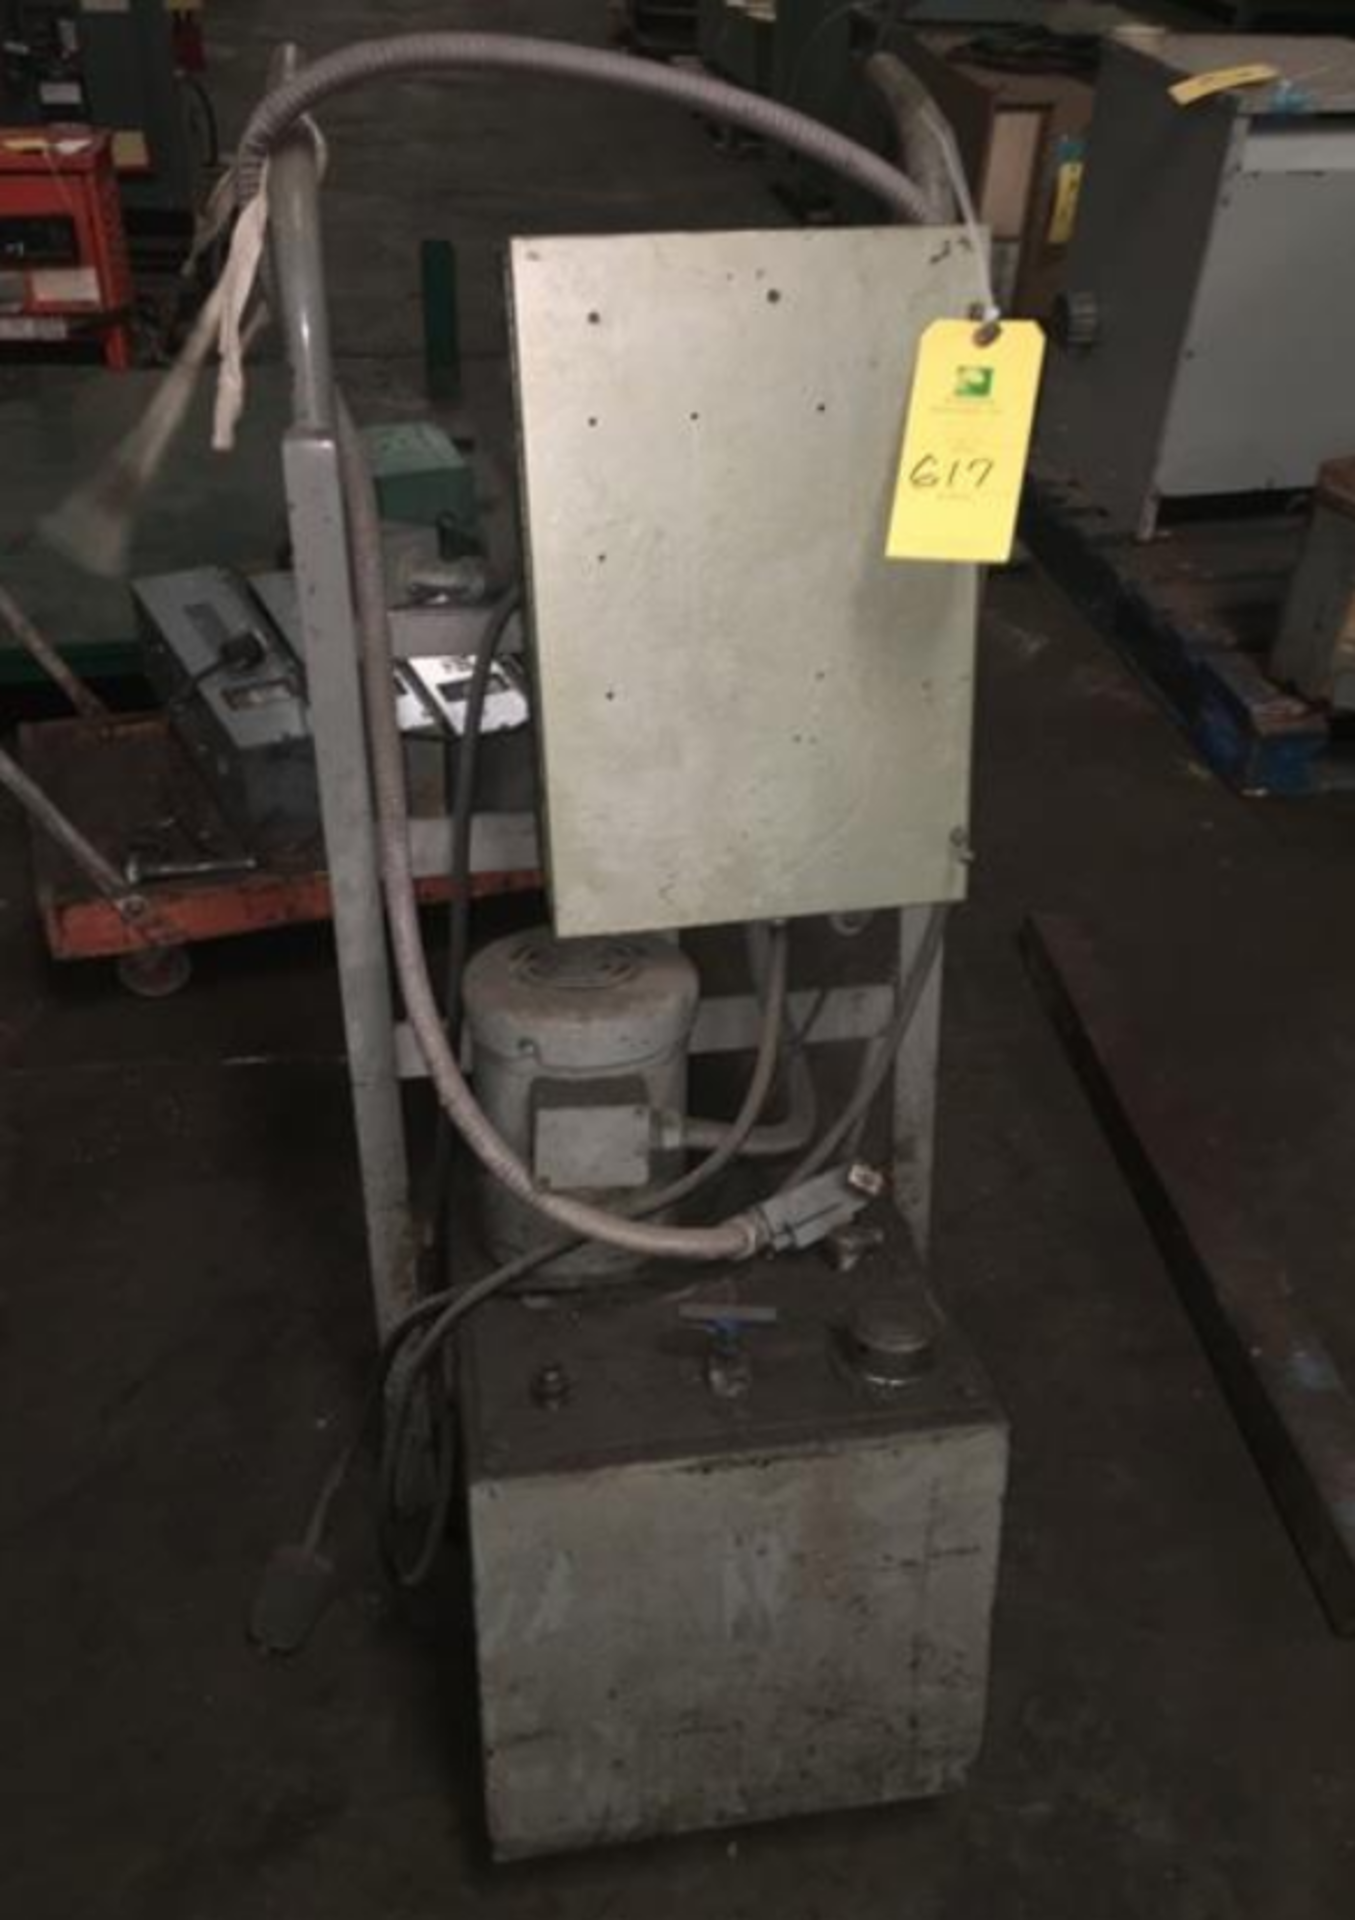 Hydraulic Pump on Cart, No ID Tag, Rigging Fee For This Item Is $20